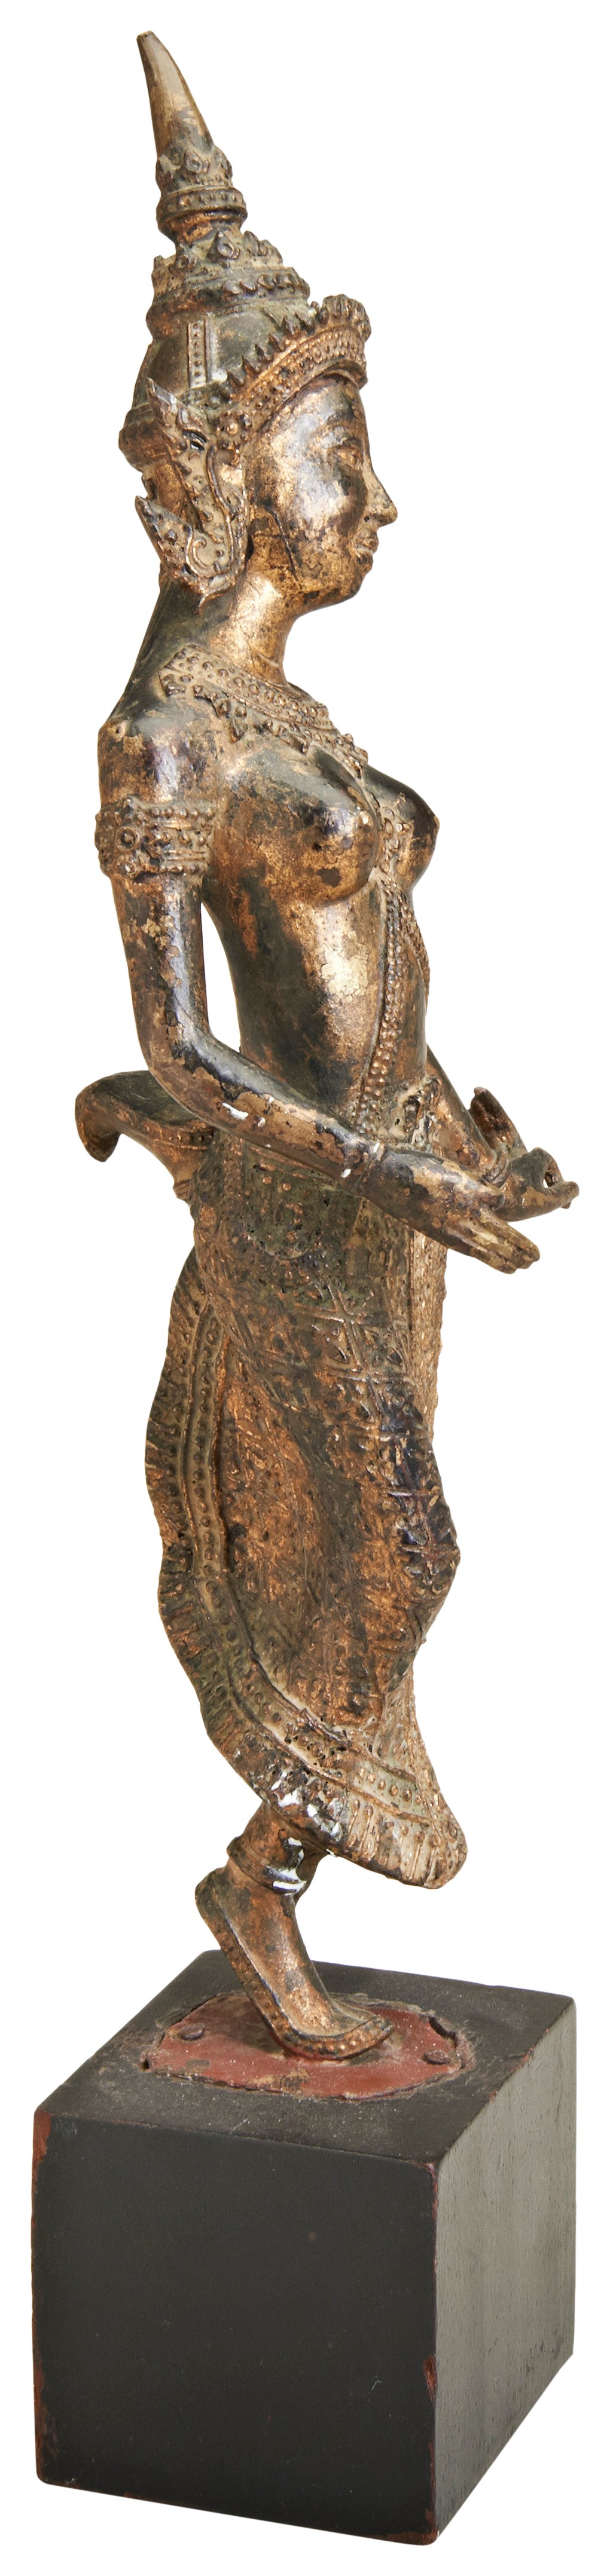 A GILT-BRONZE FIGURE OF A KHON DANCER THAILAND, LATE 19TH / EARLY 20TH CENTURY on a later wood stand - Bild 2 aus 3